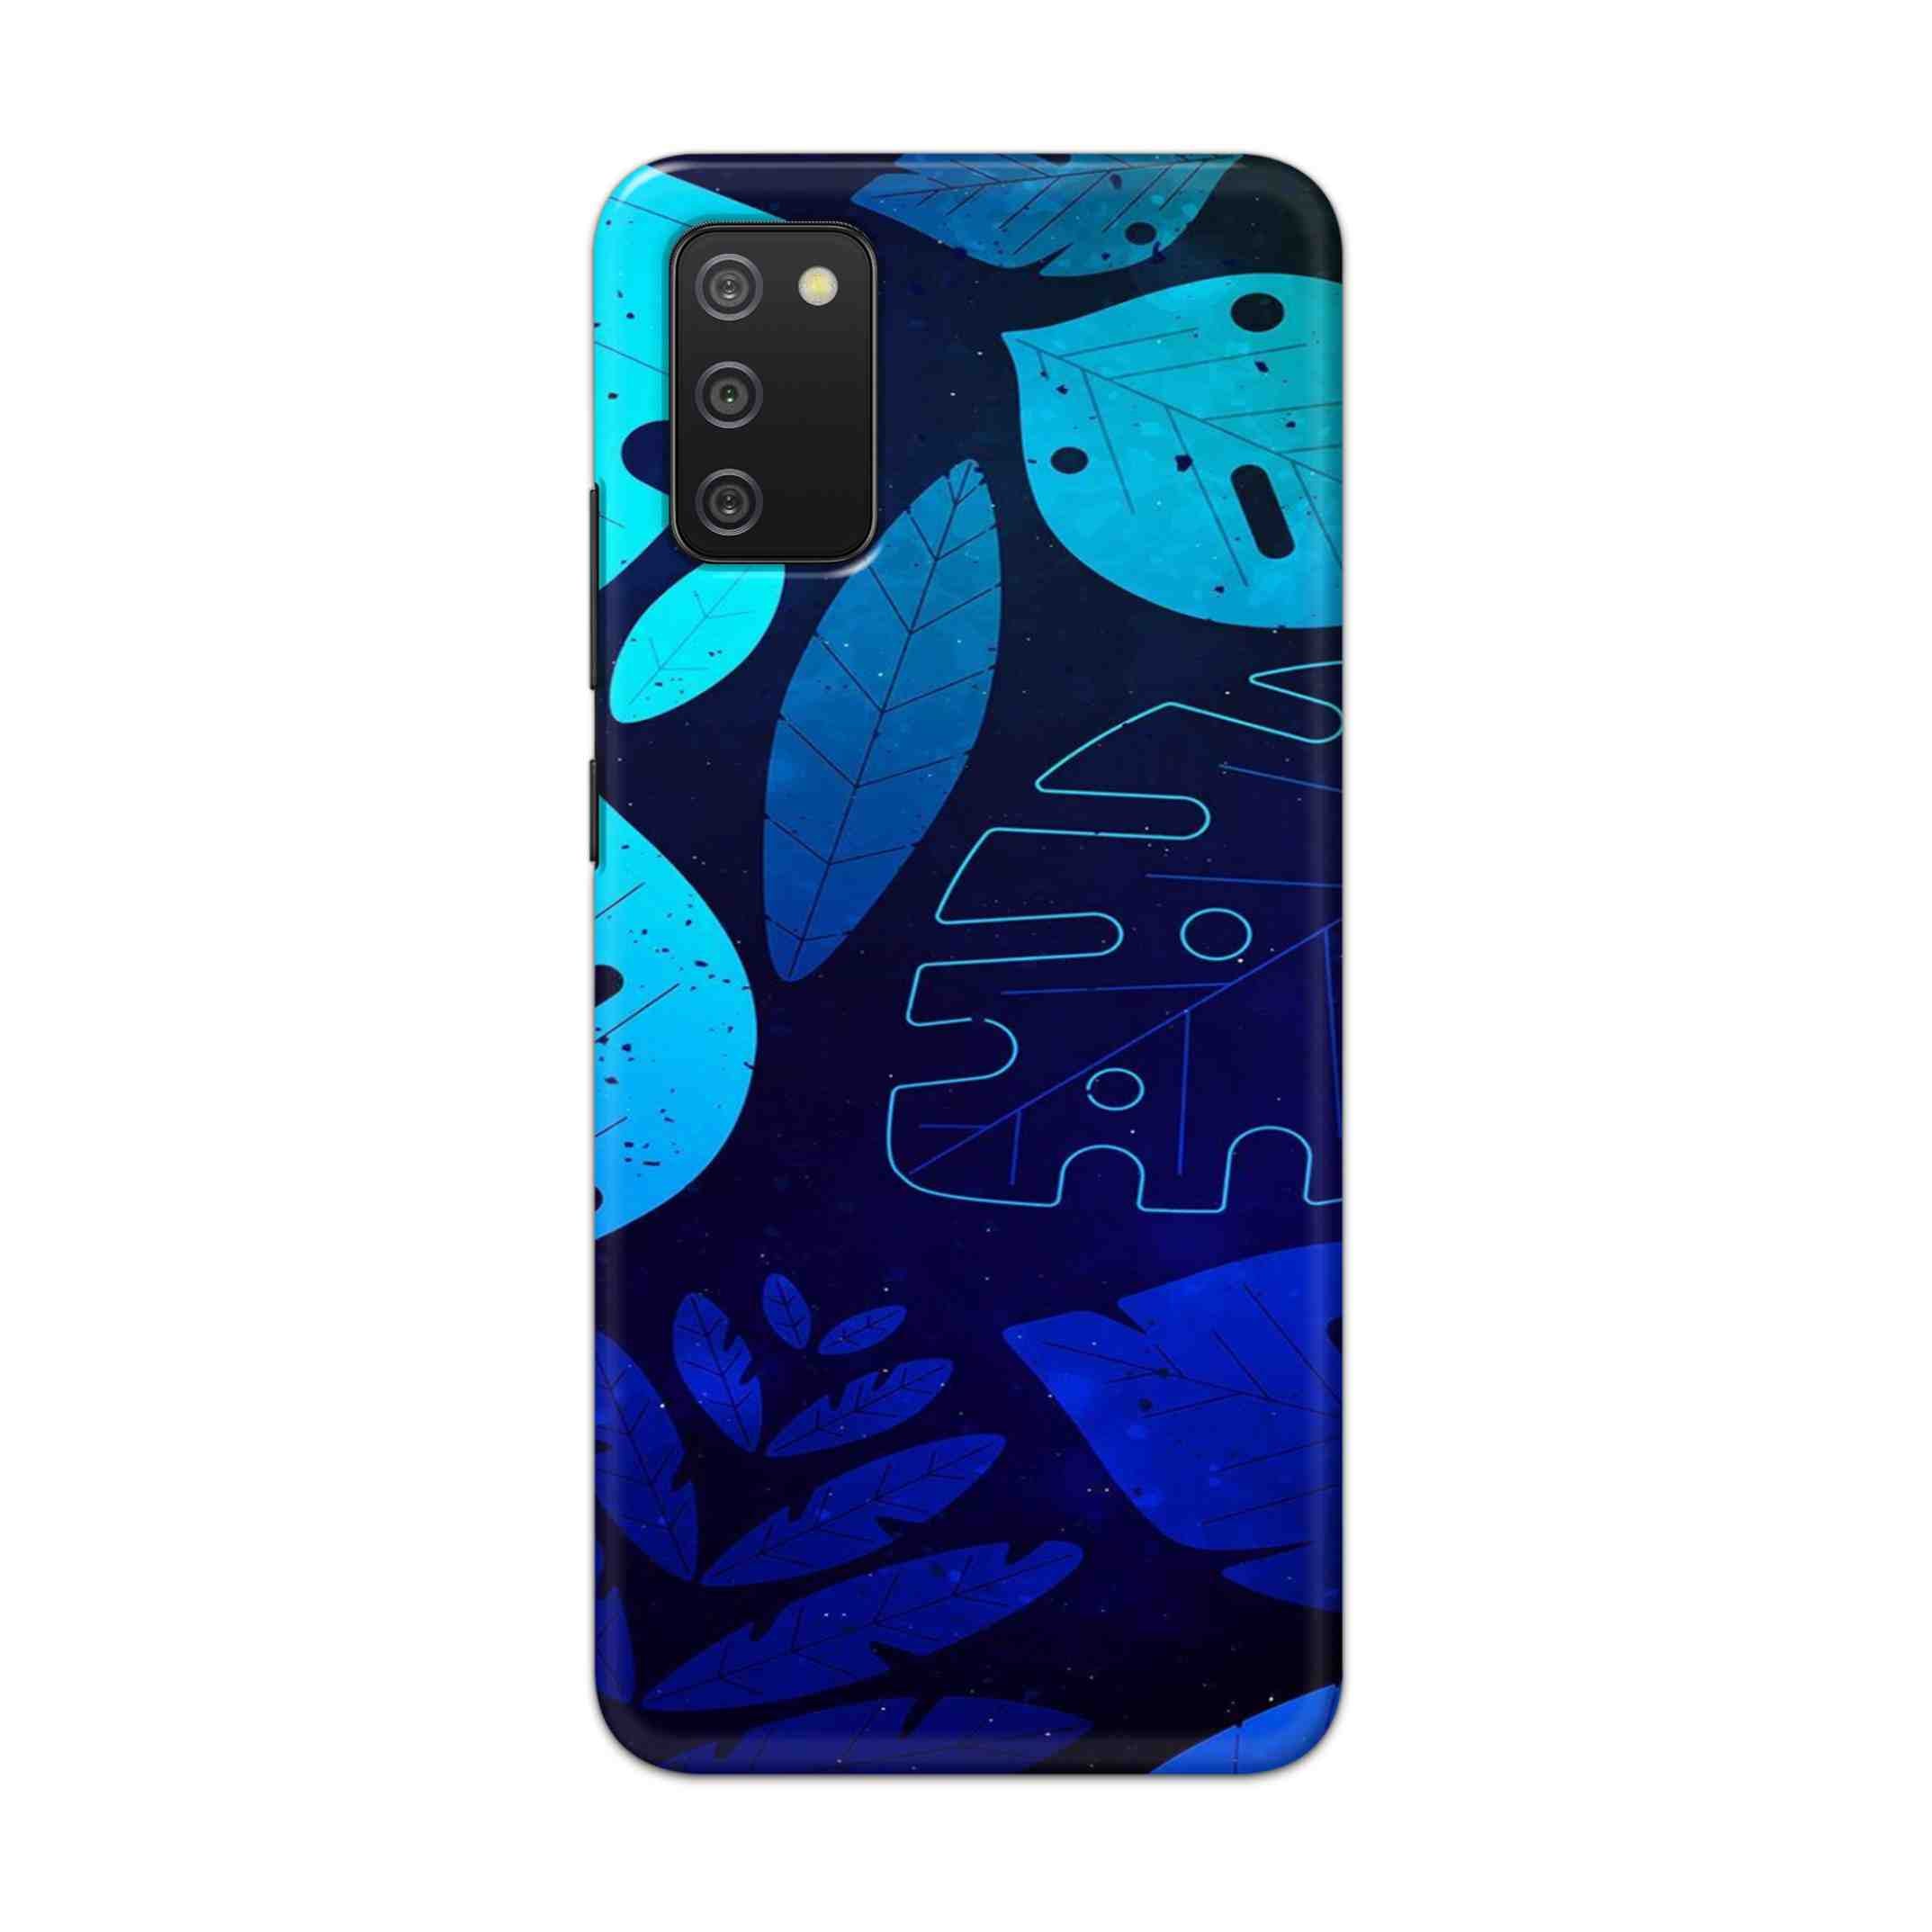 Buy Neon Leaf Hard Back Mobile Phone Case Cover For Samsung Galaxy M02s Online